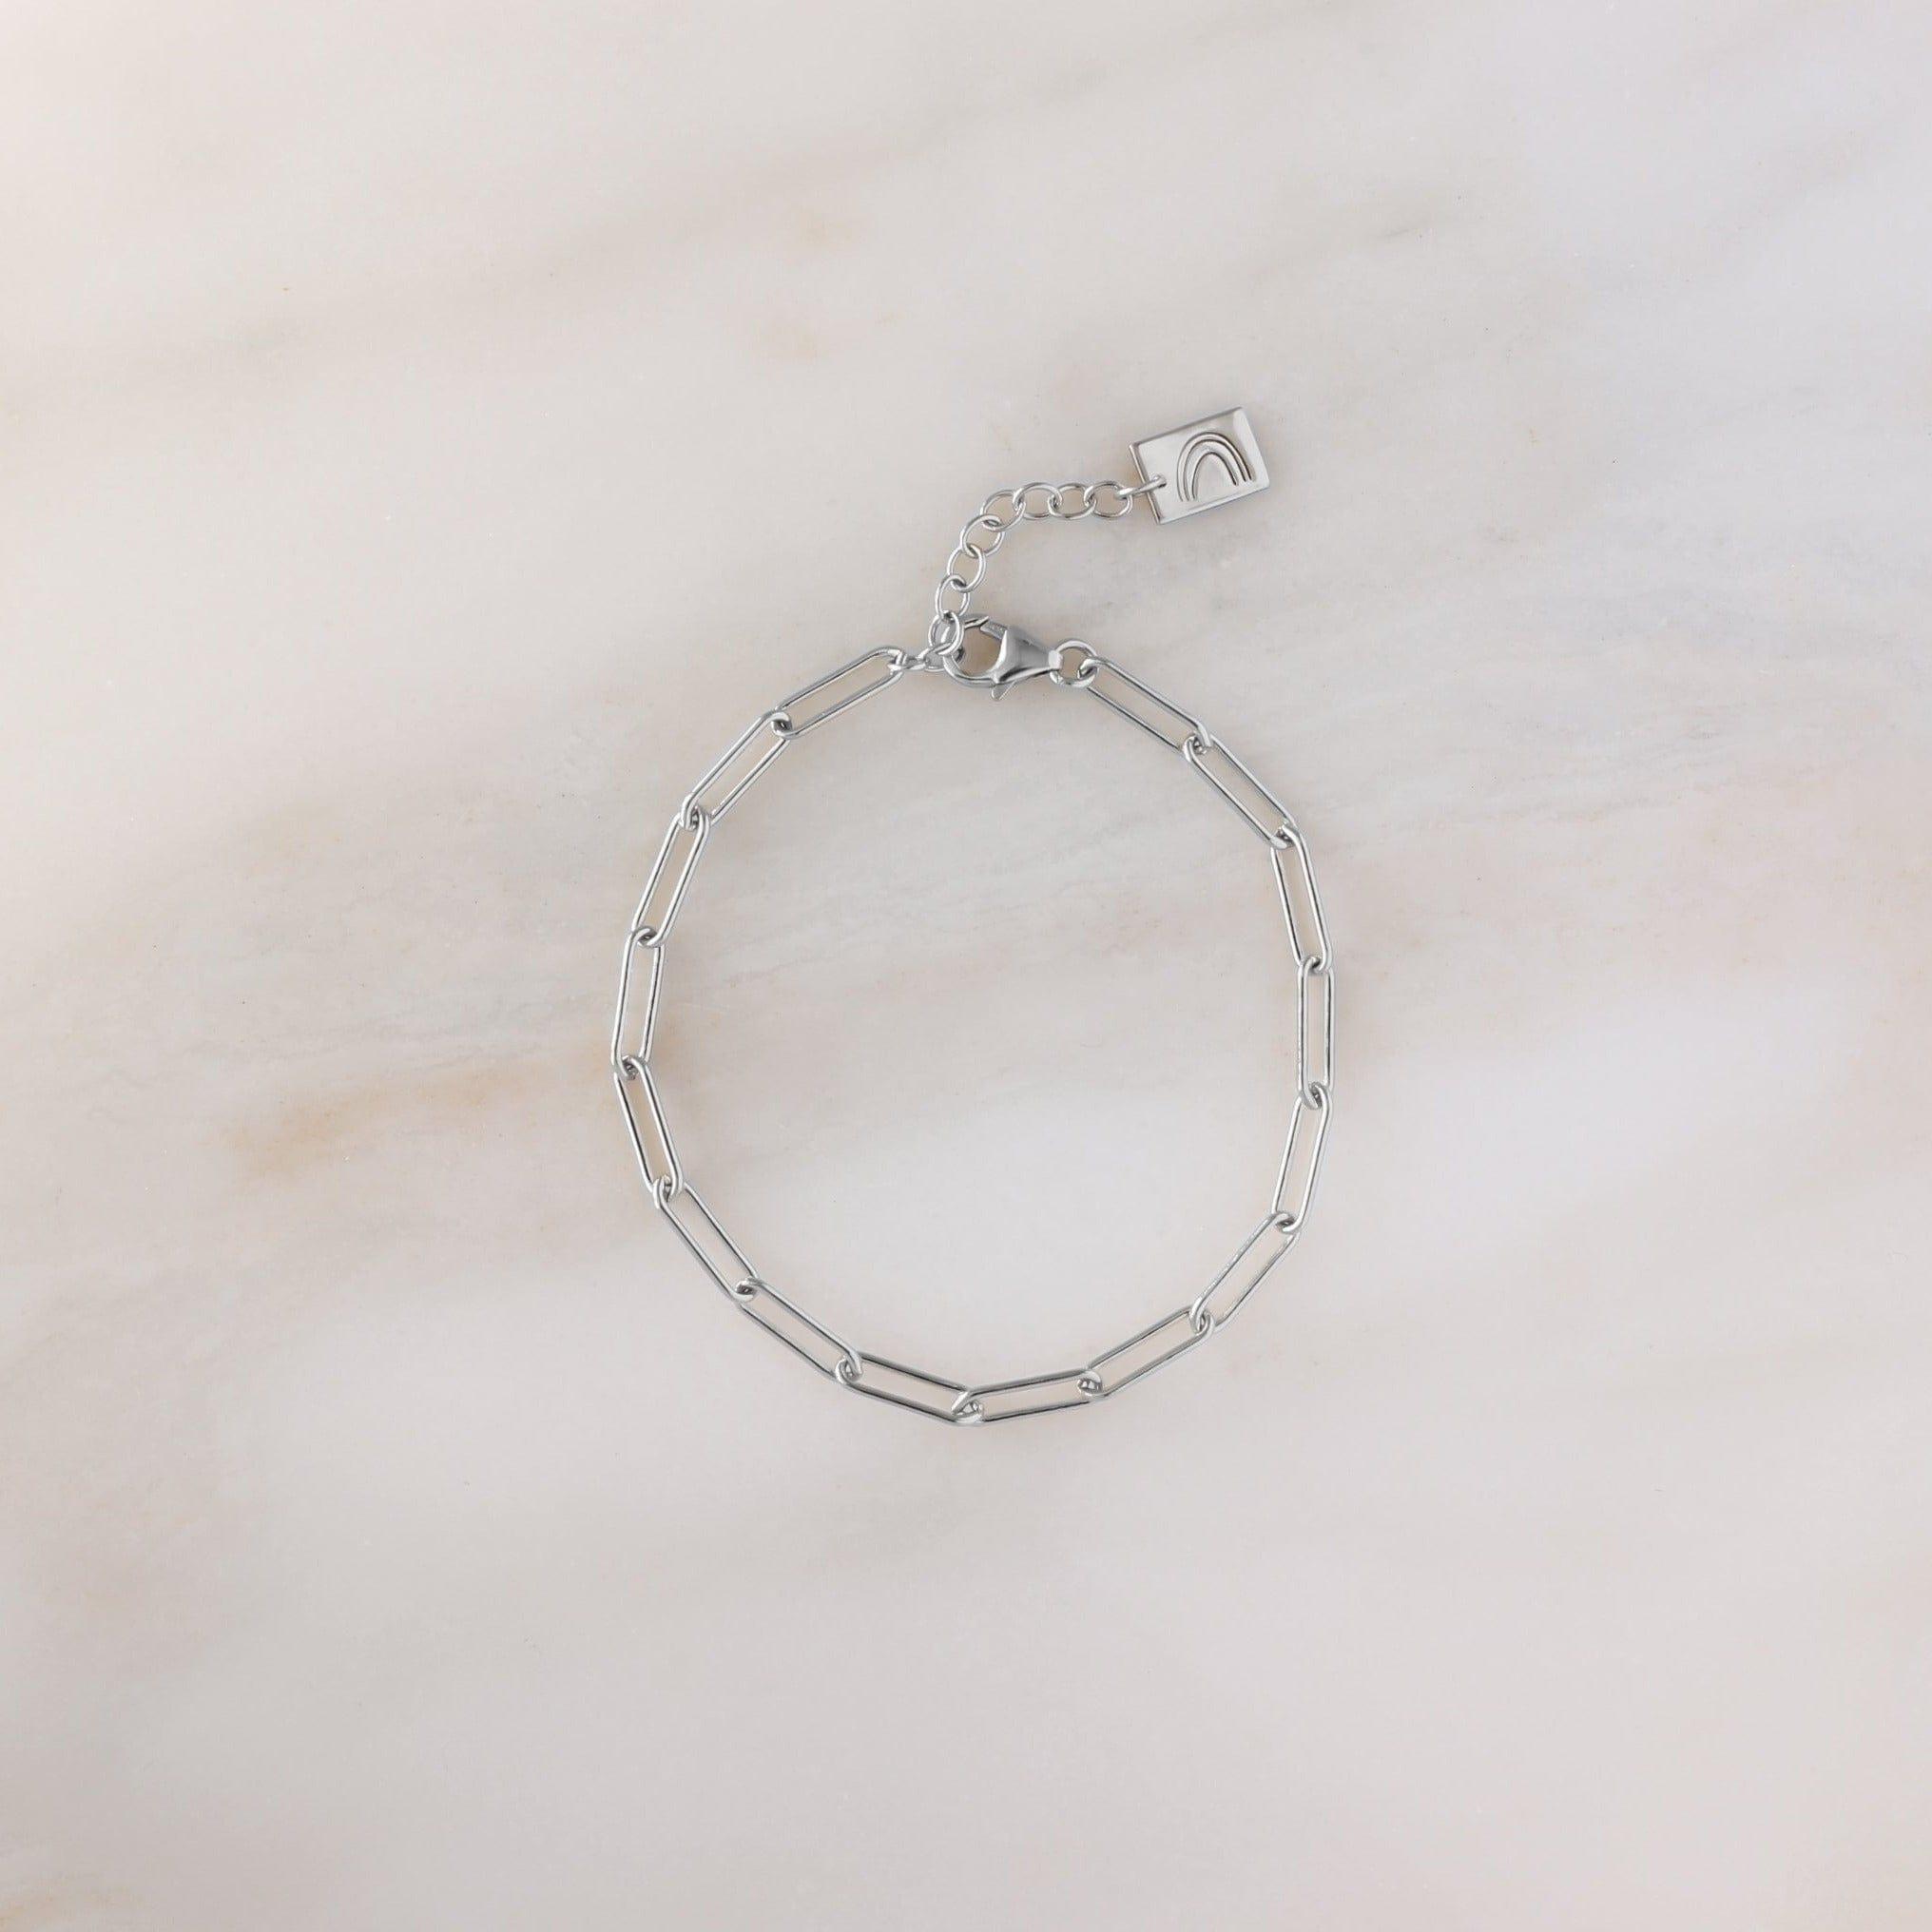 Personalized Paperclip Bracelet - Nolia Jewelry - Meaningful + Sustainably Handcrafted Jewelry